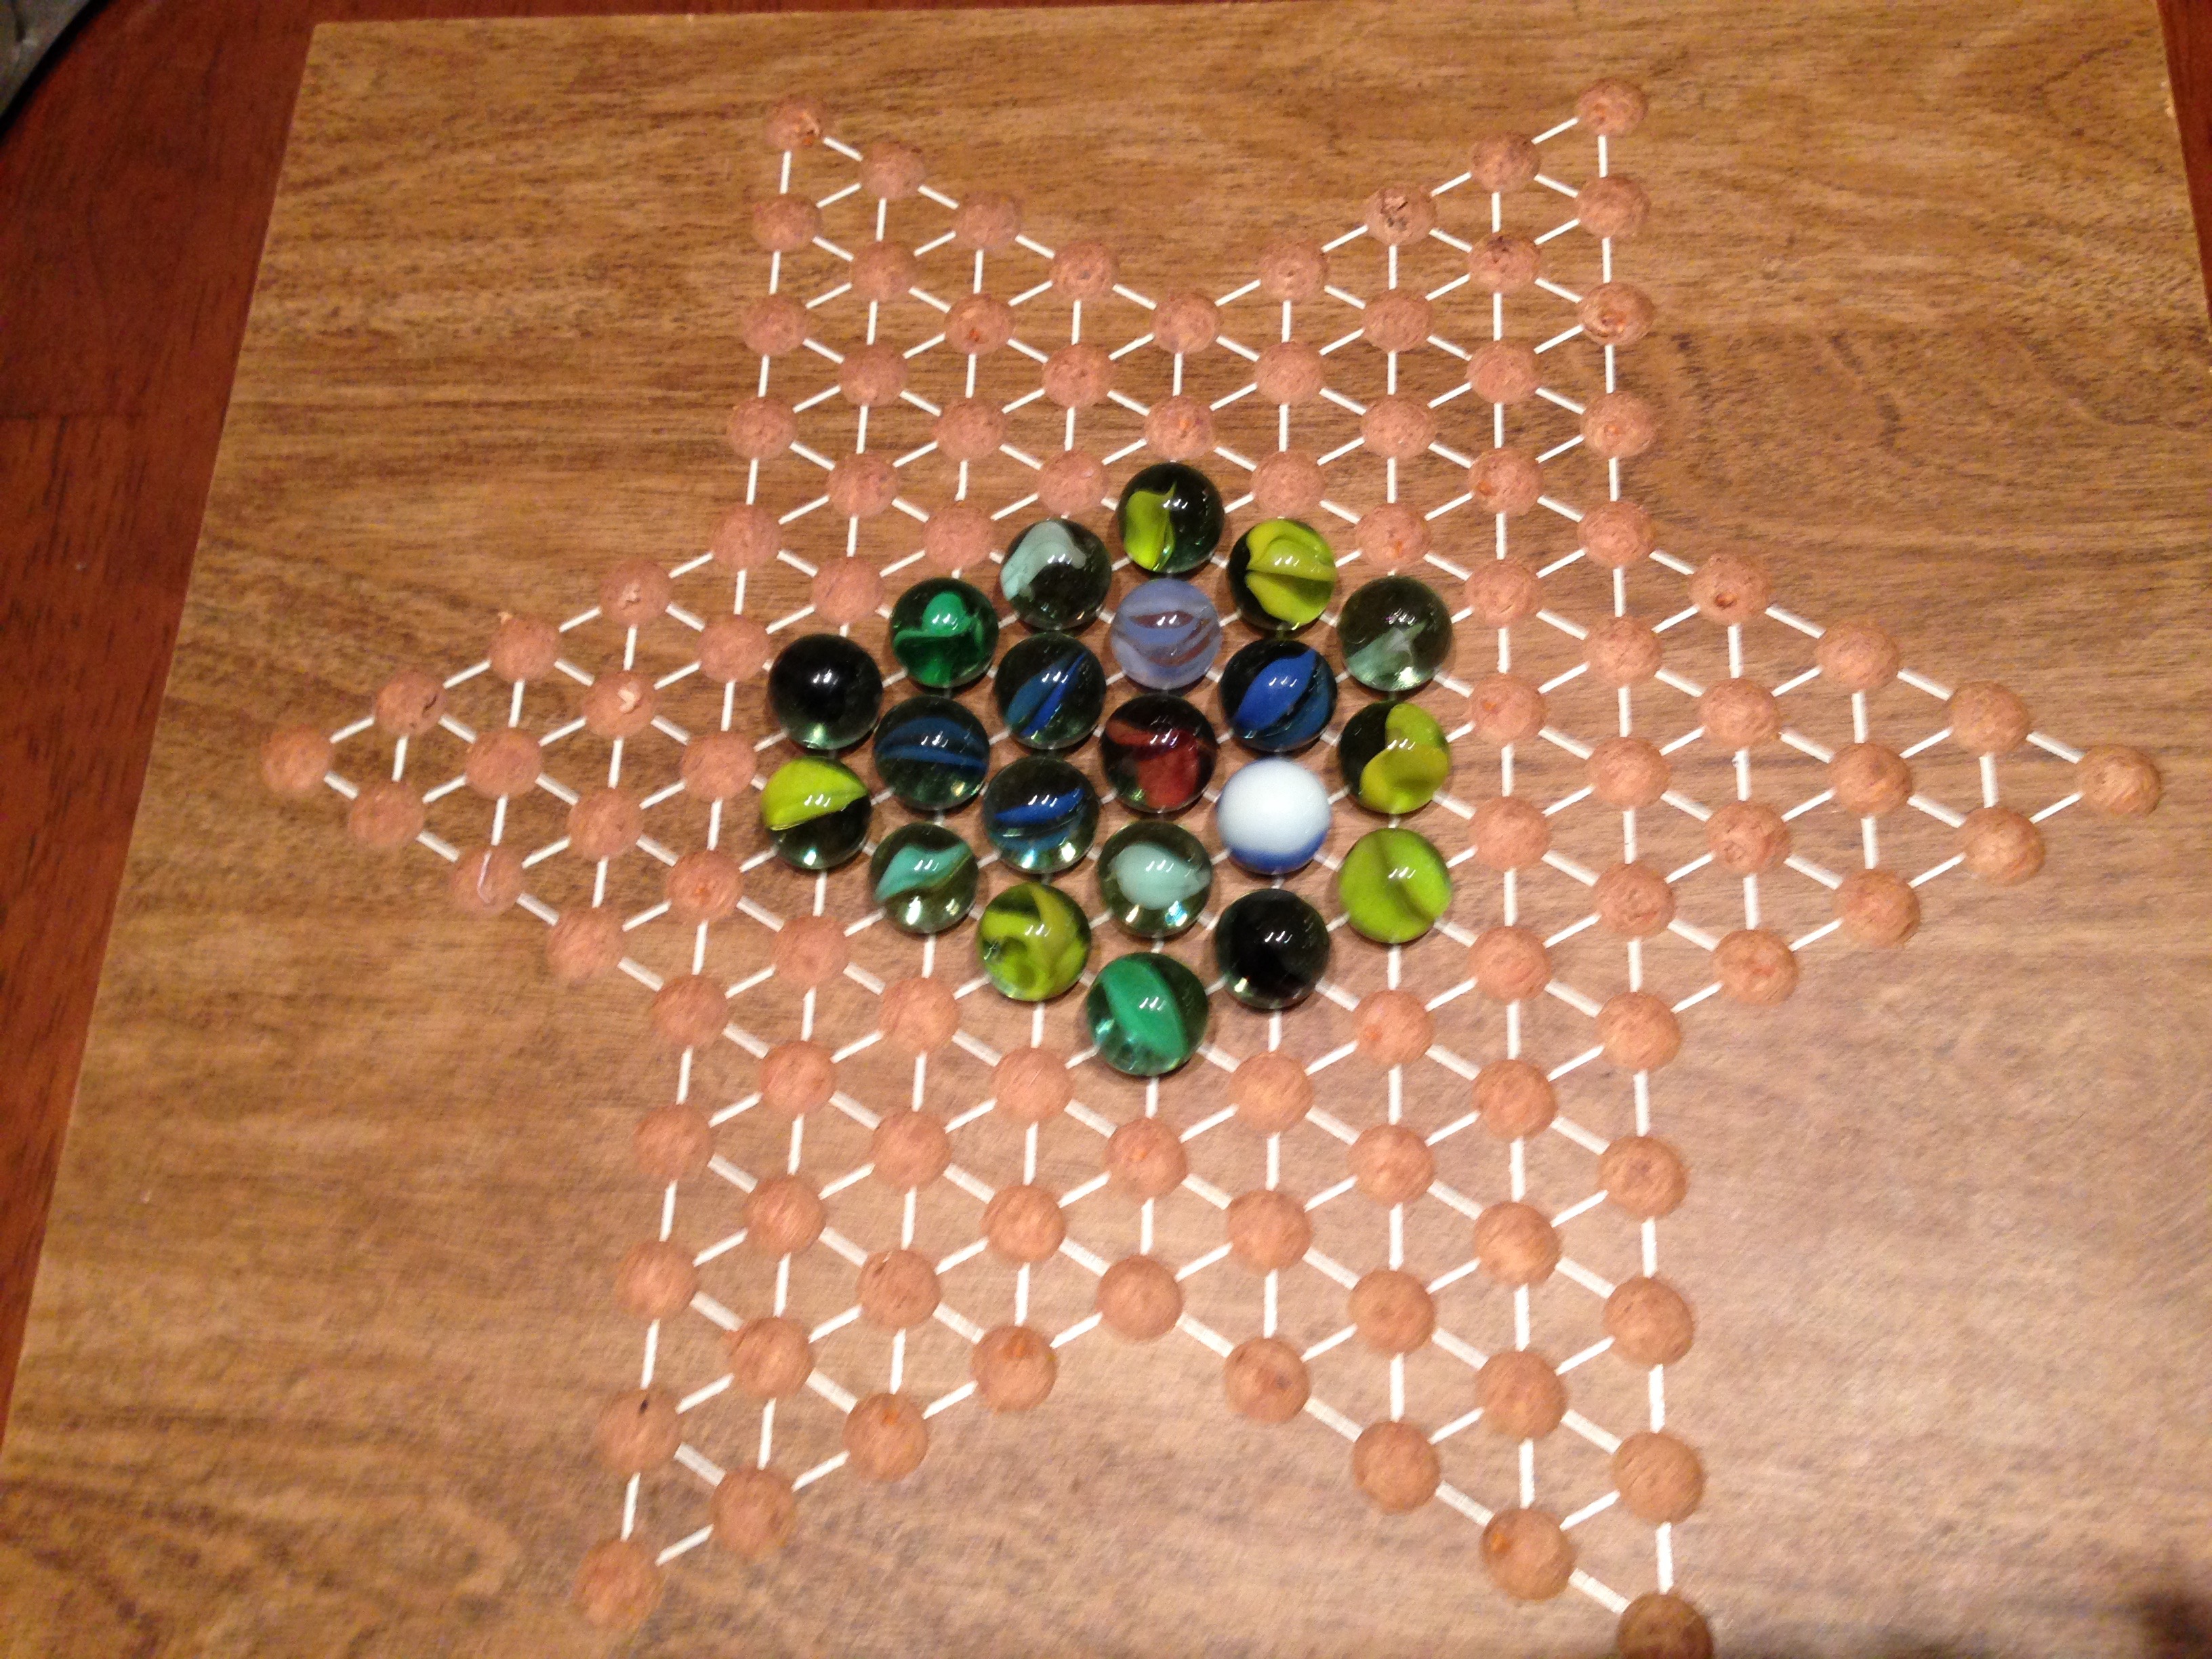 chinese checkers rules jumping